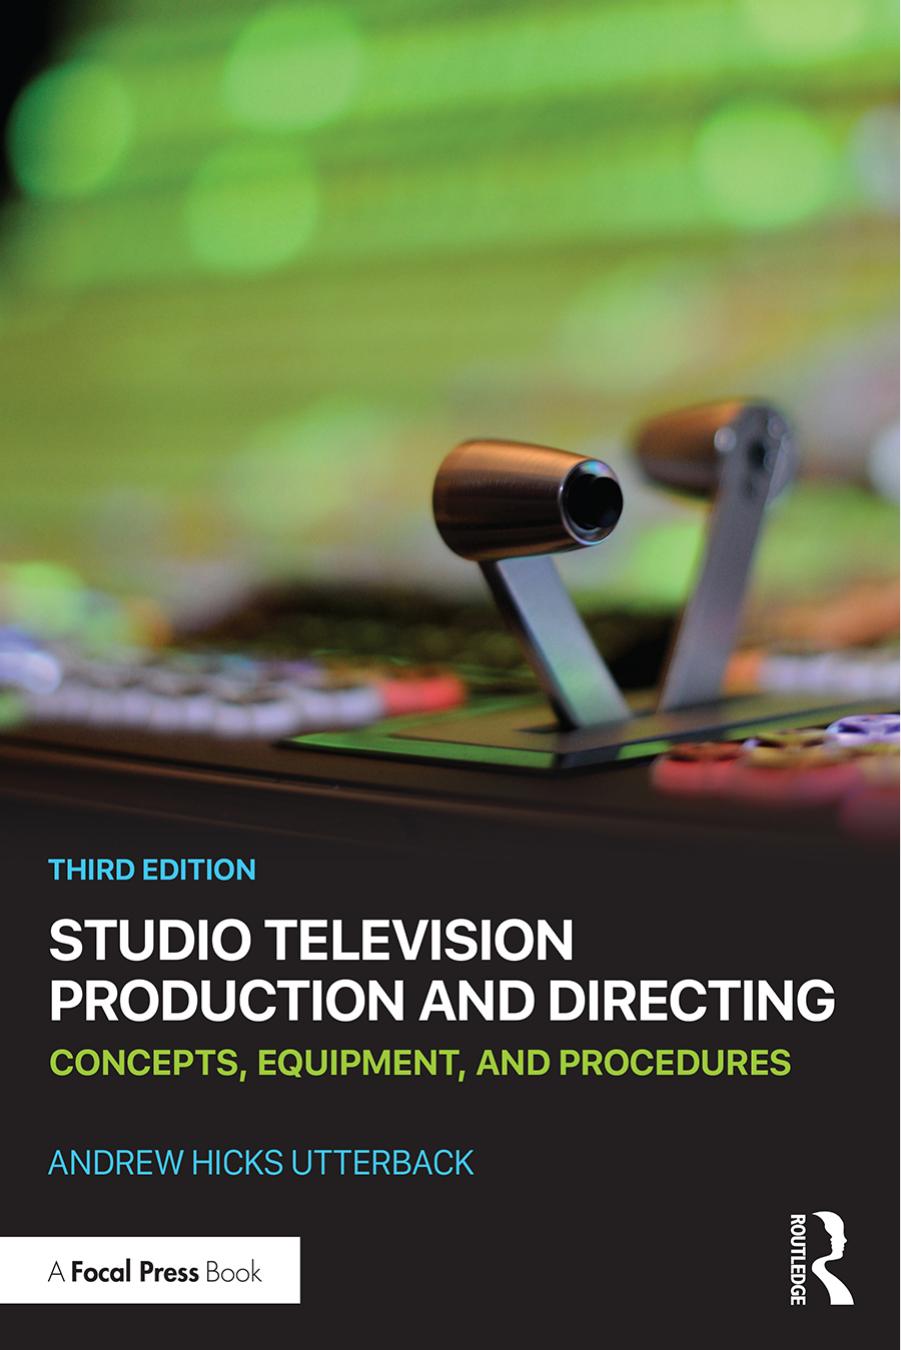 Studio Television Production and Directing: Concepts, Equipment, and Procedures by Andrew Hicks Utterback